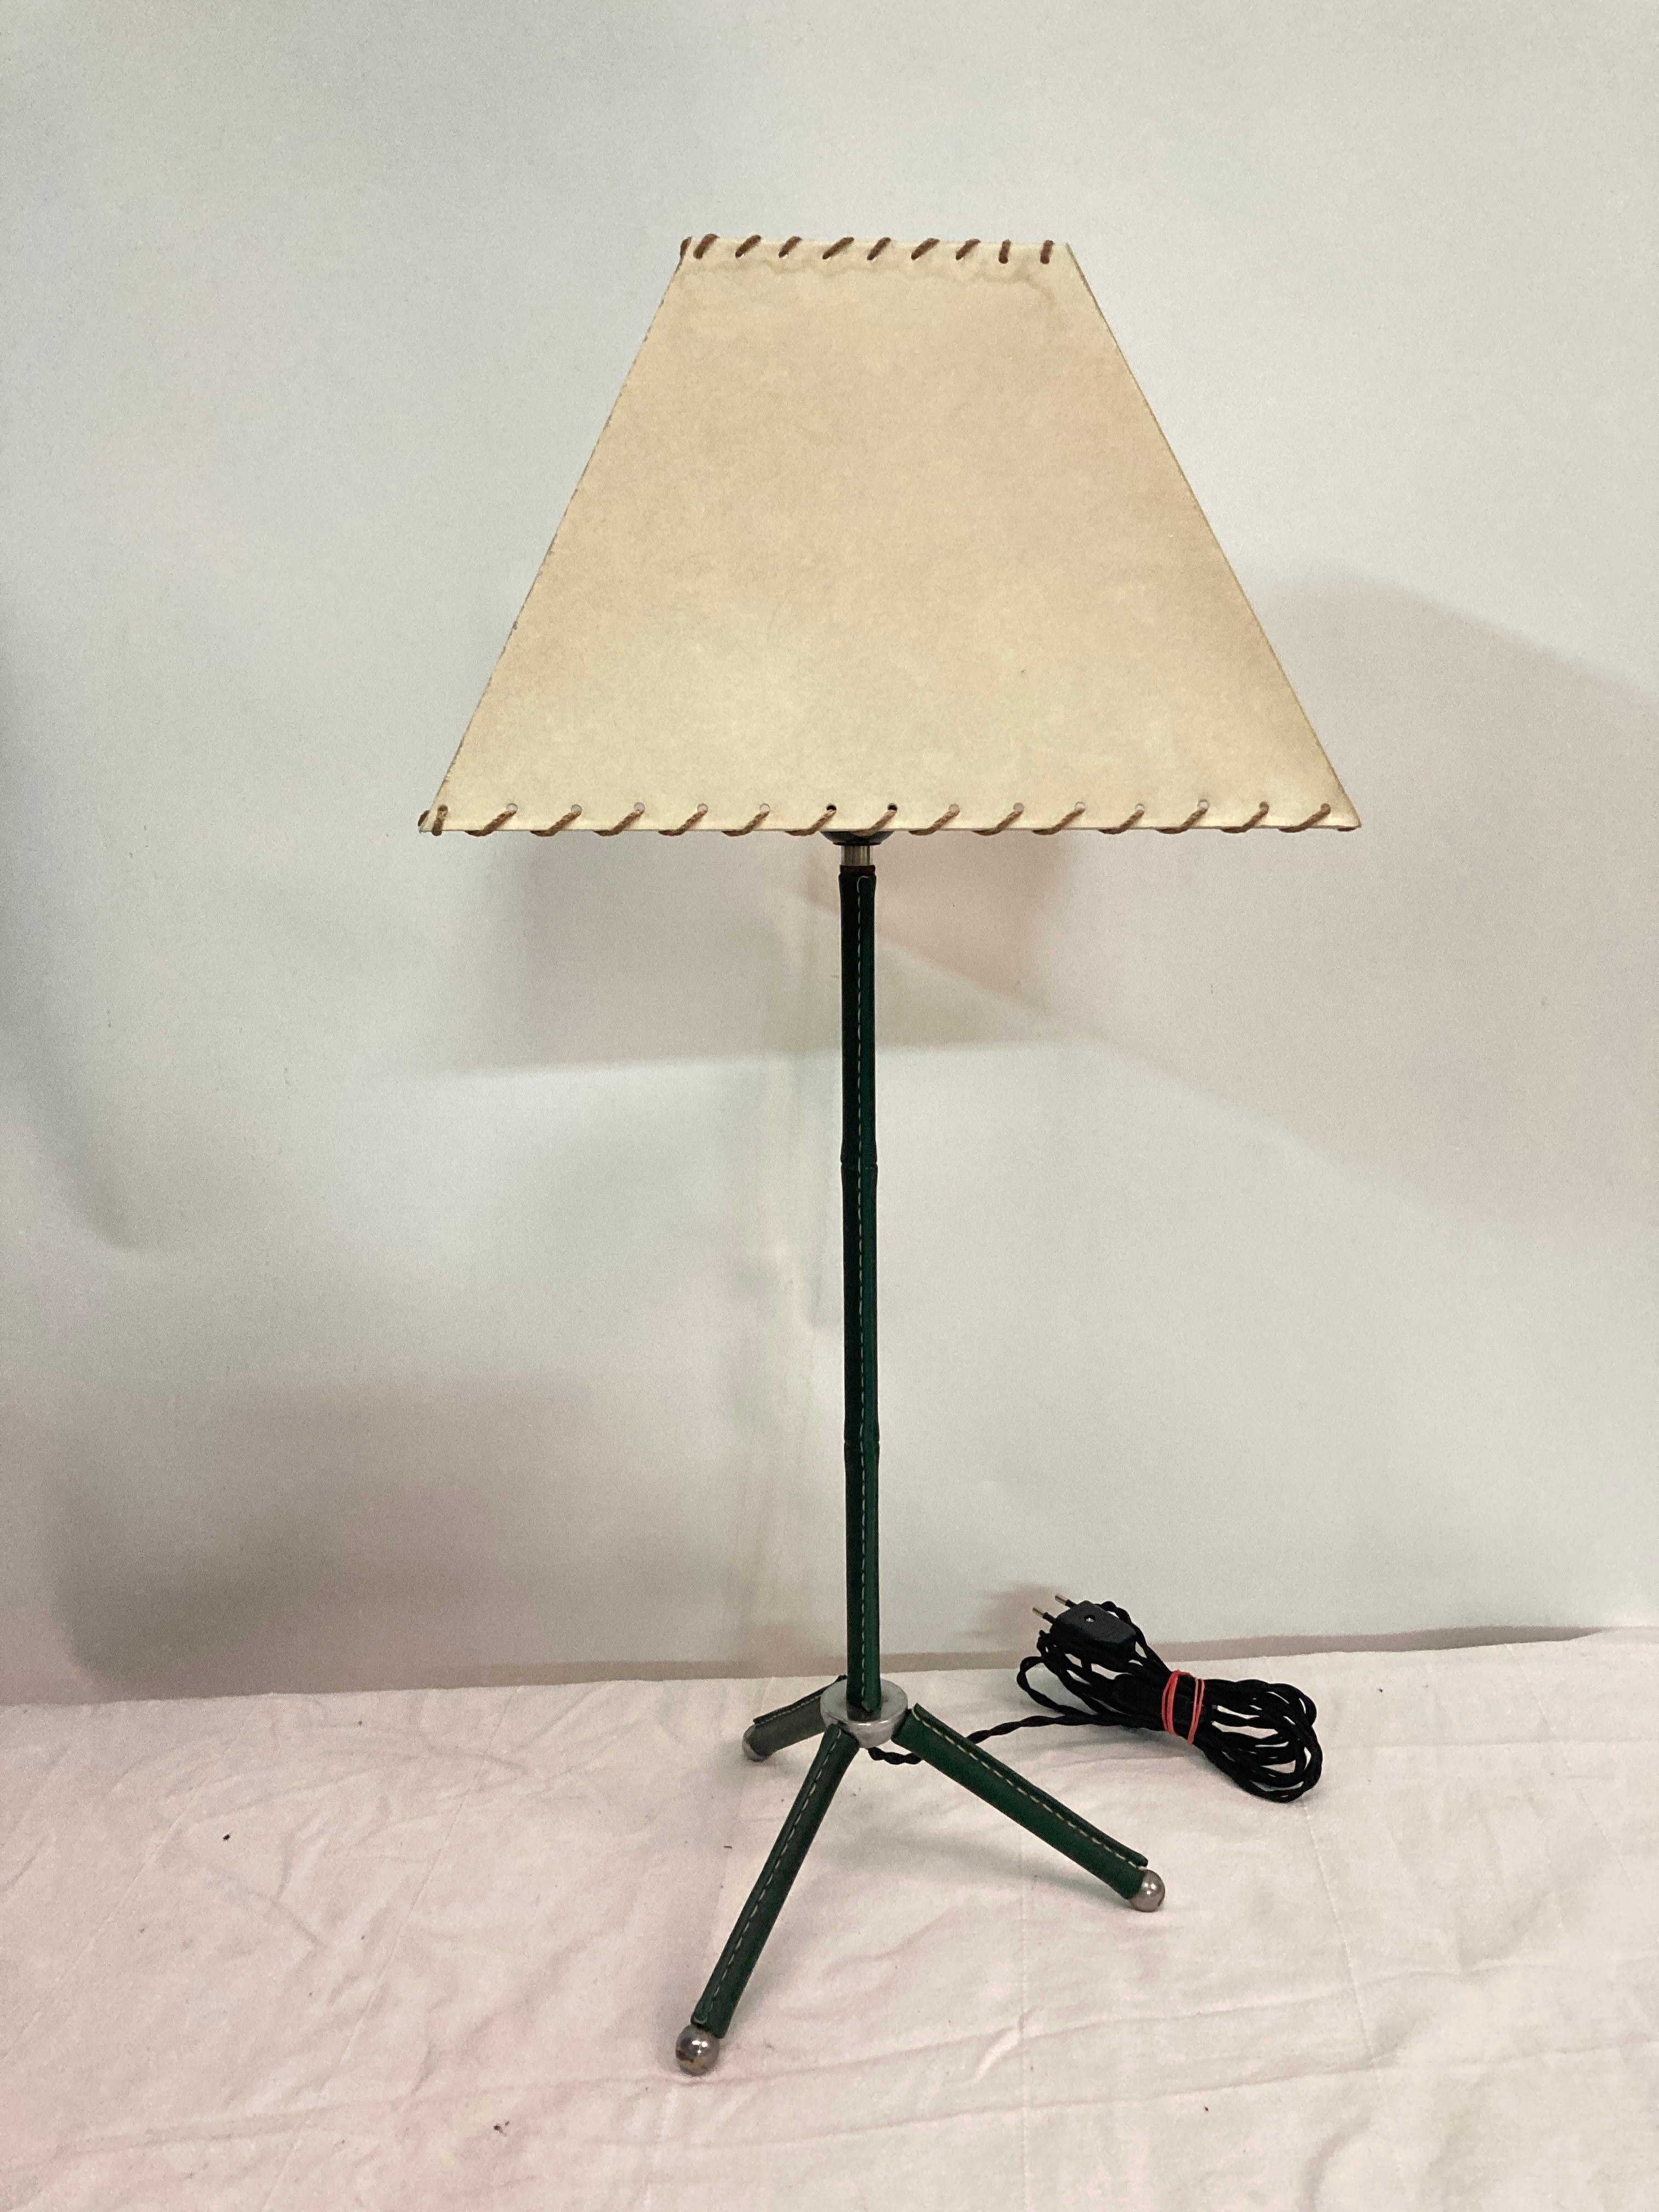 1950's Stitched leather lamp By Jacques Adnet
Dark English green leather
Dimensions given without shade
No shade included
Newly re-wired